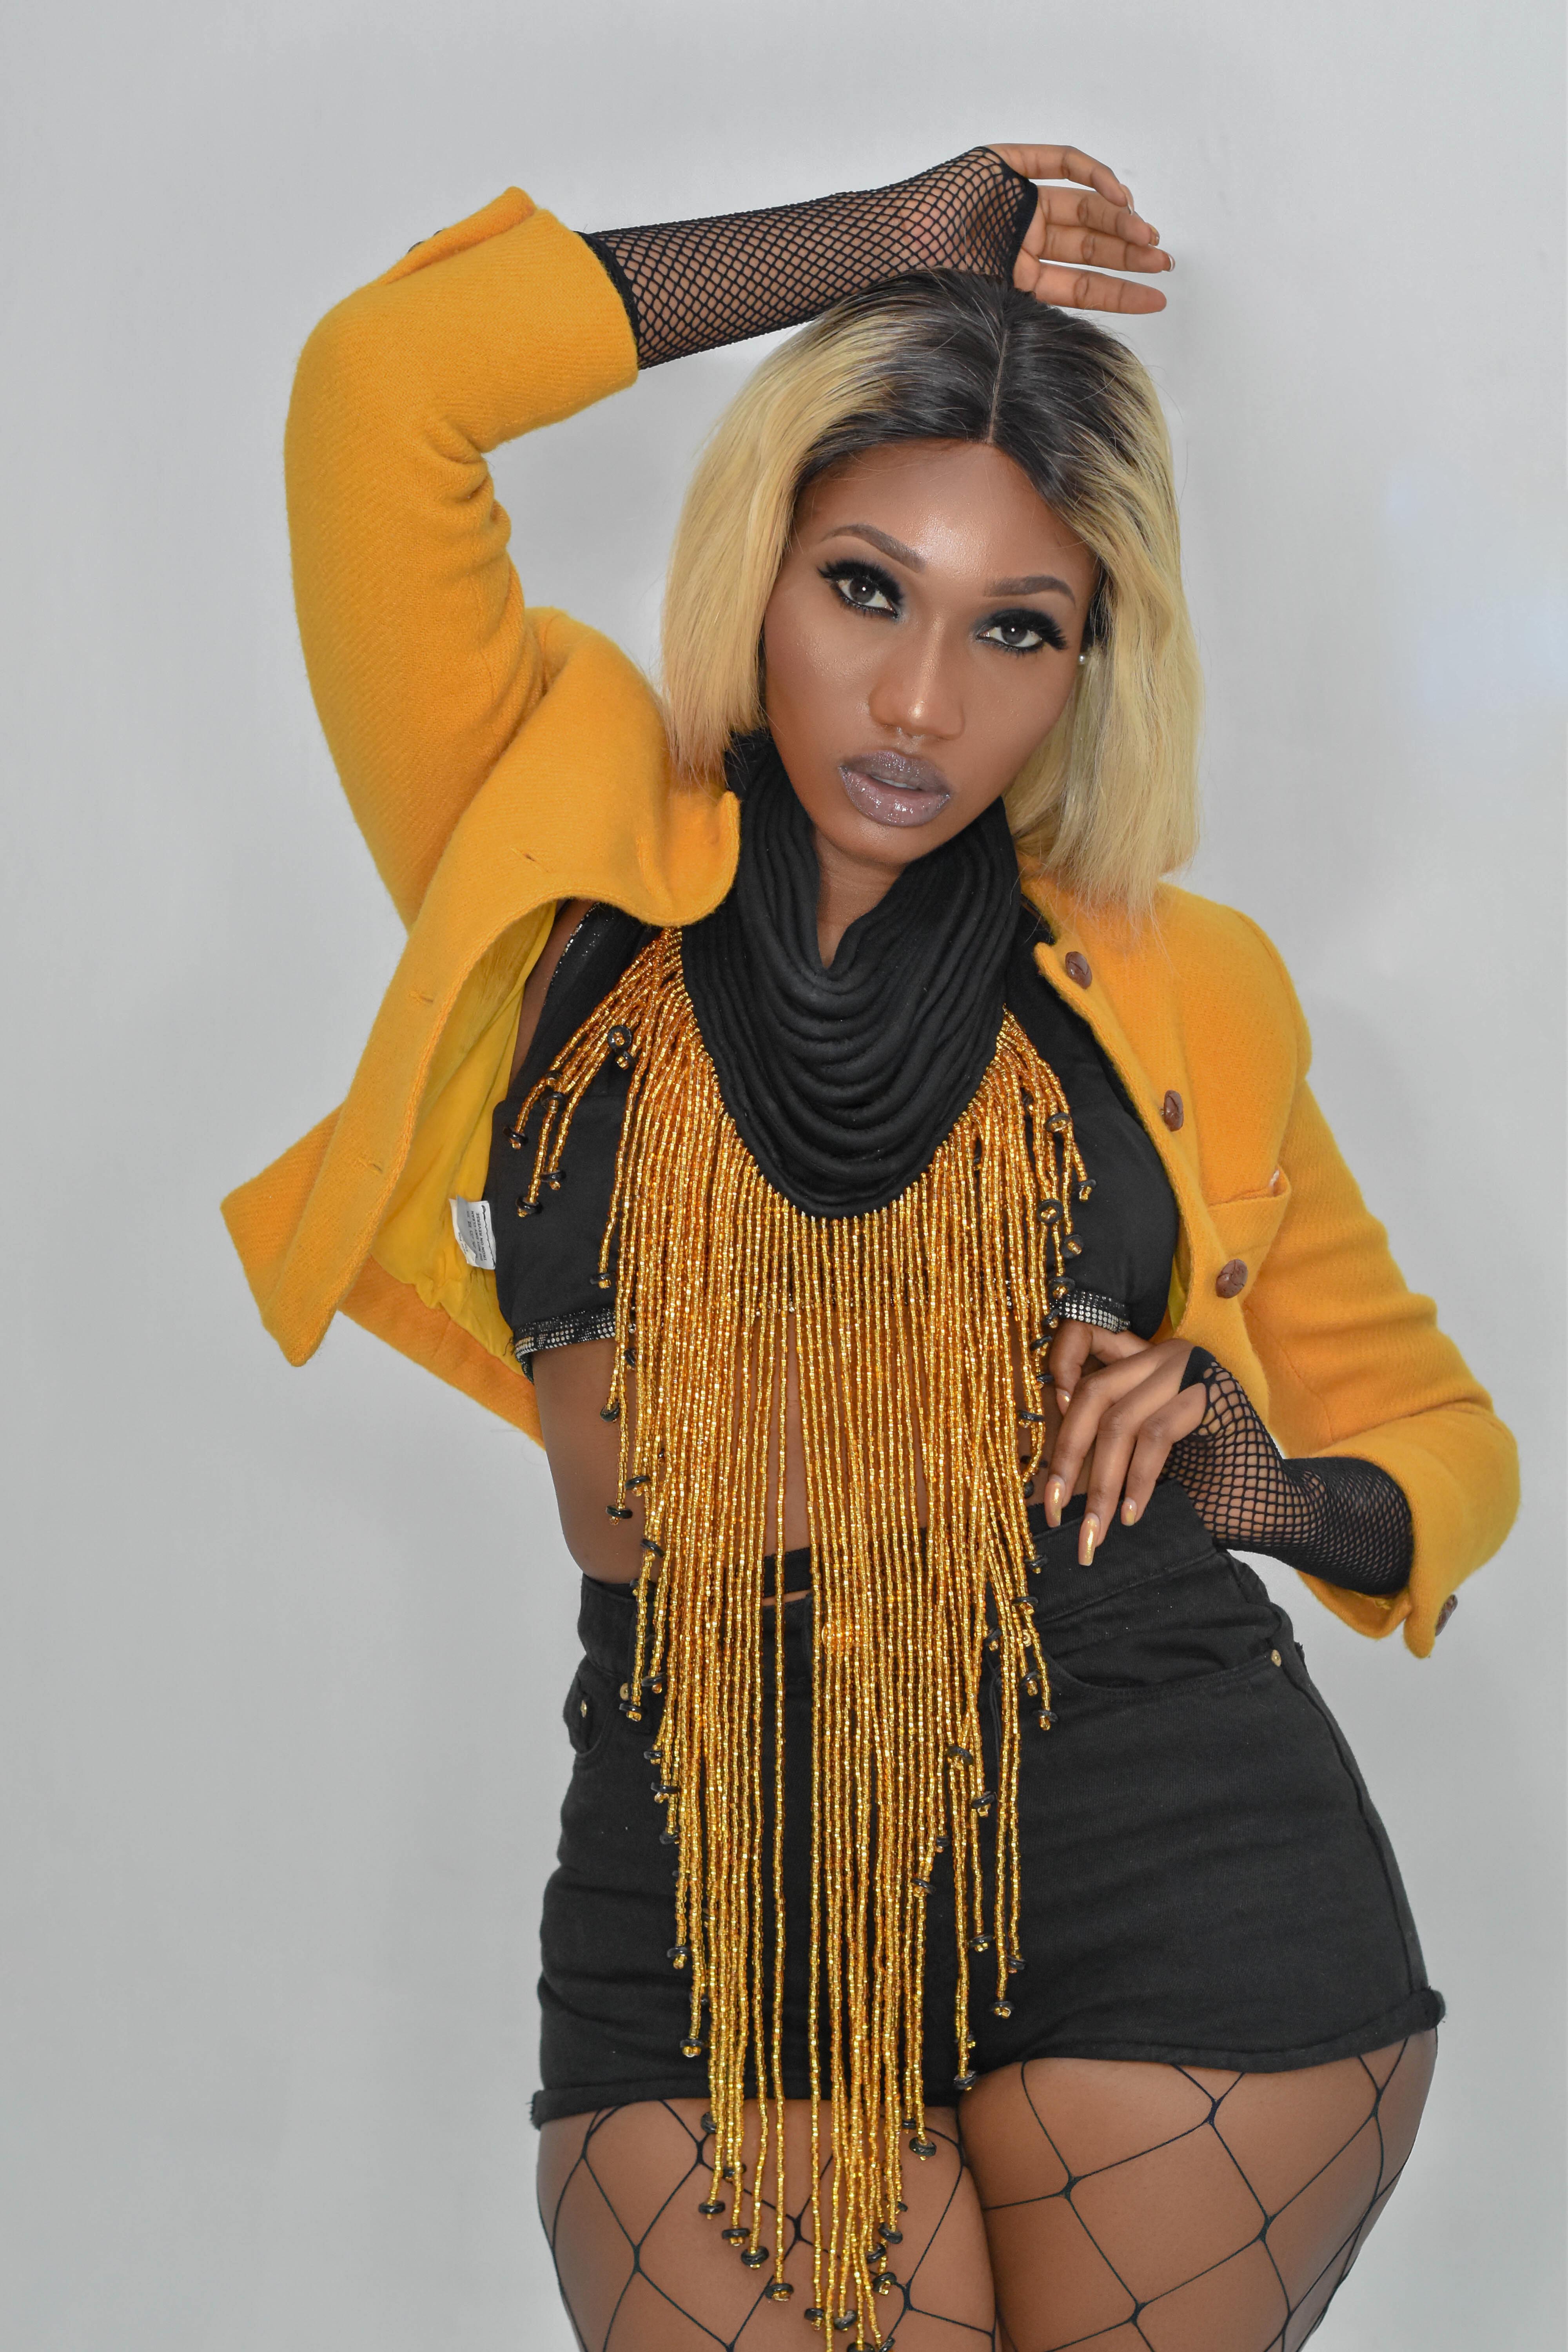 Wendy Shay Releases Sizzling Hot Promo Images